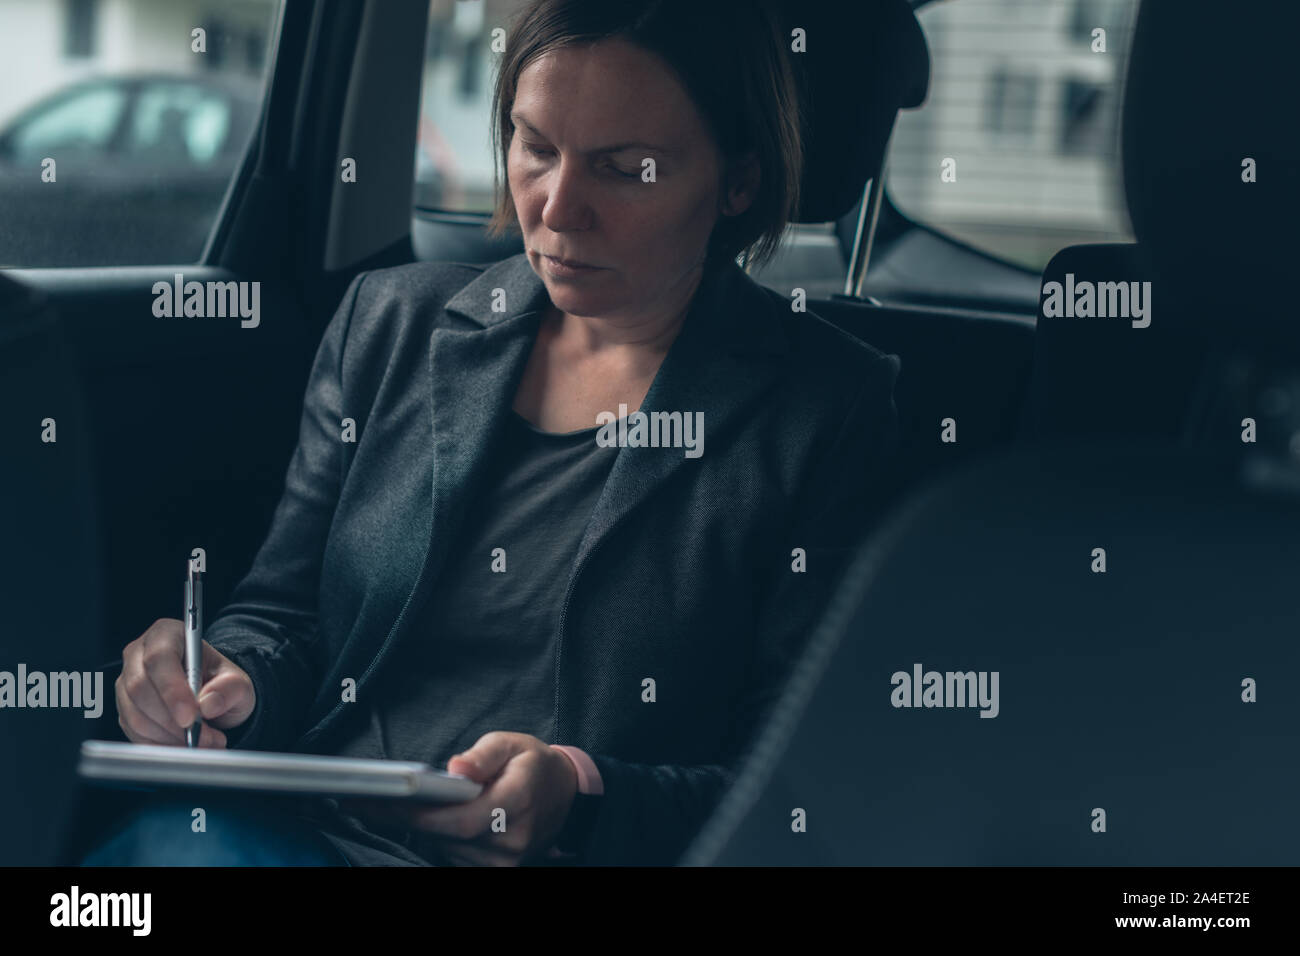 Businesswoman doing paperwork and analyzing business report while sitting in car at the back seat Stock Photo